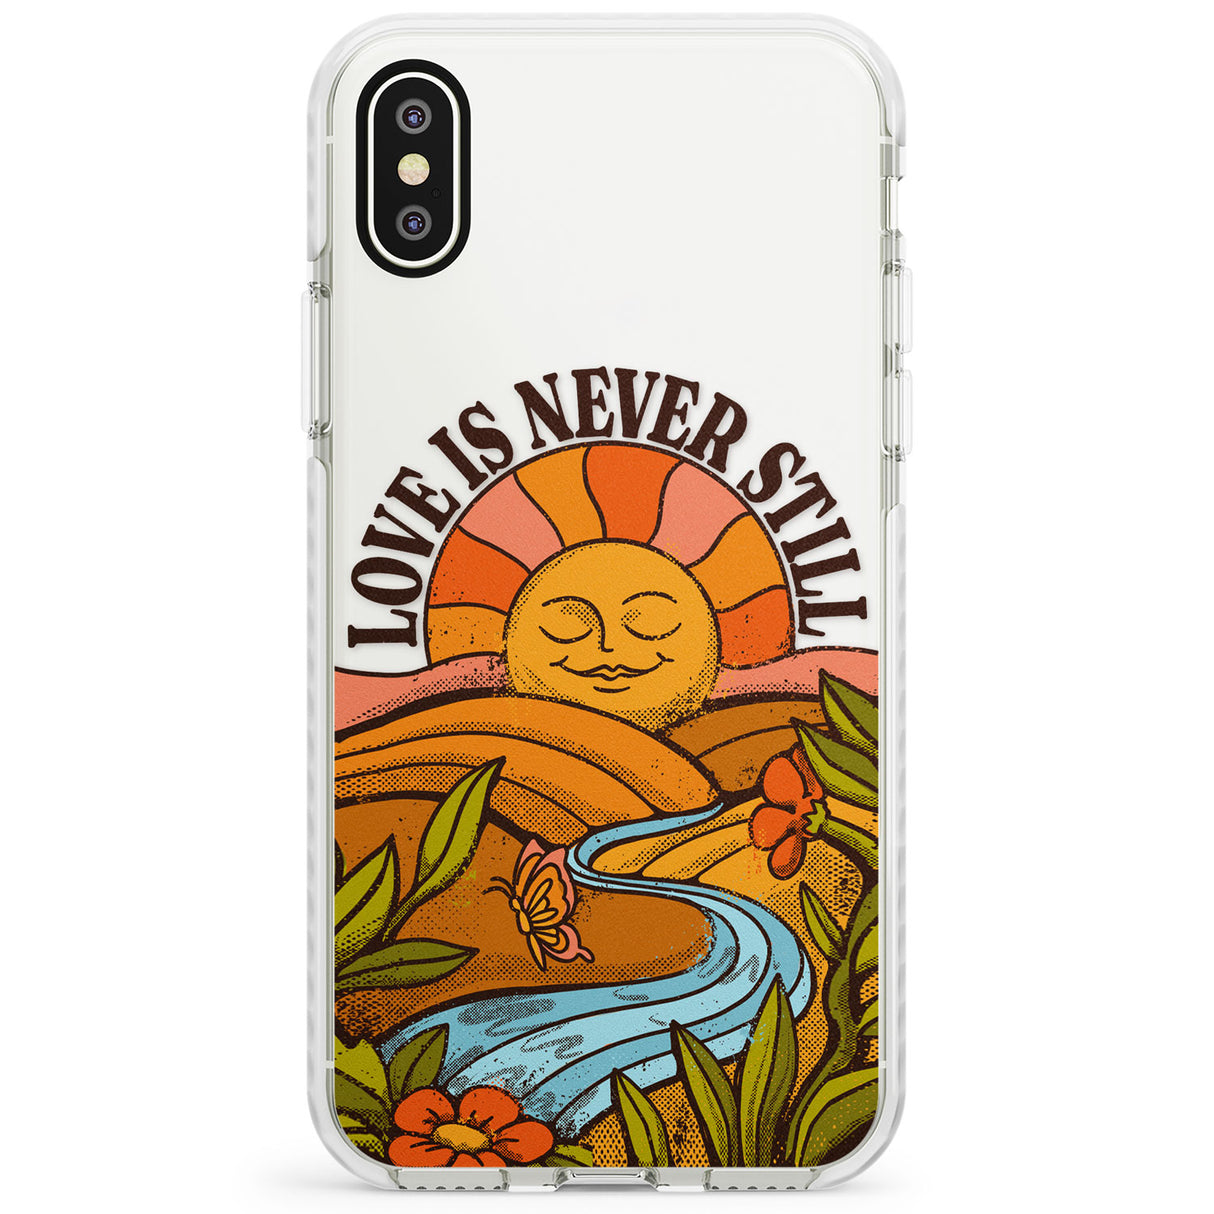 Love is Never Still Impact Phone Case for iPhone X XS Max XR